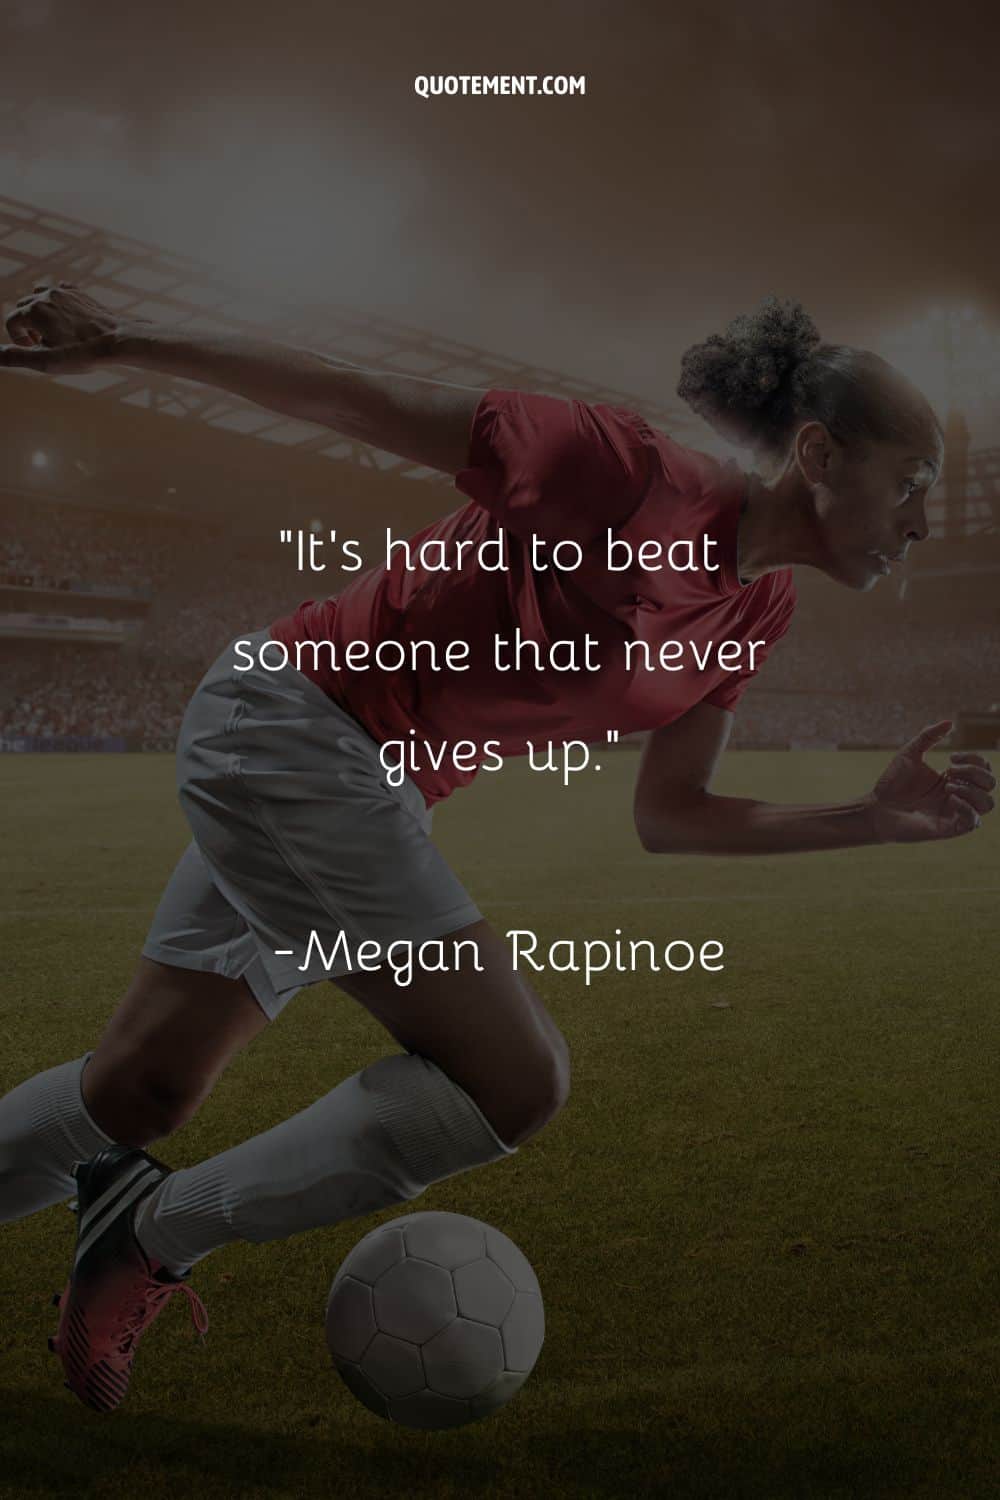 Focused female athlete commands the field representing soccer encouragement quote